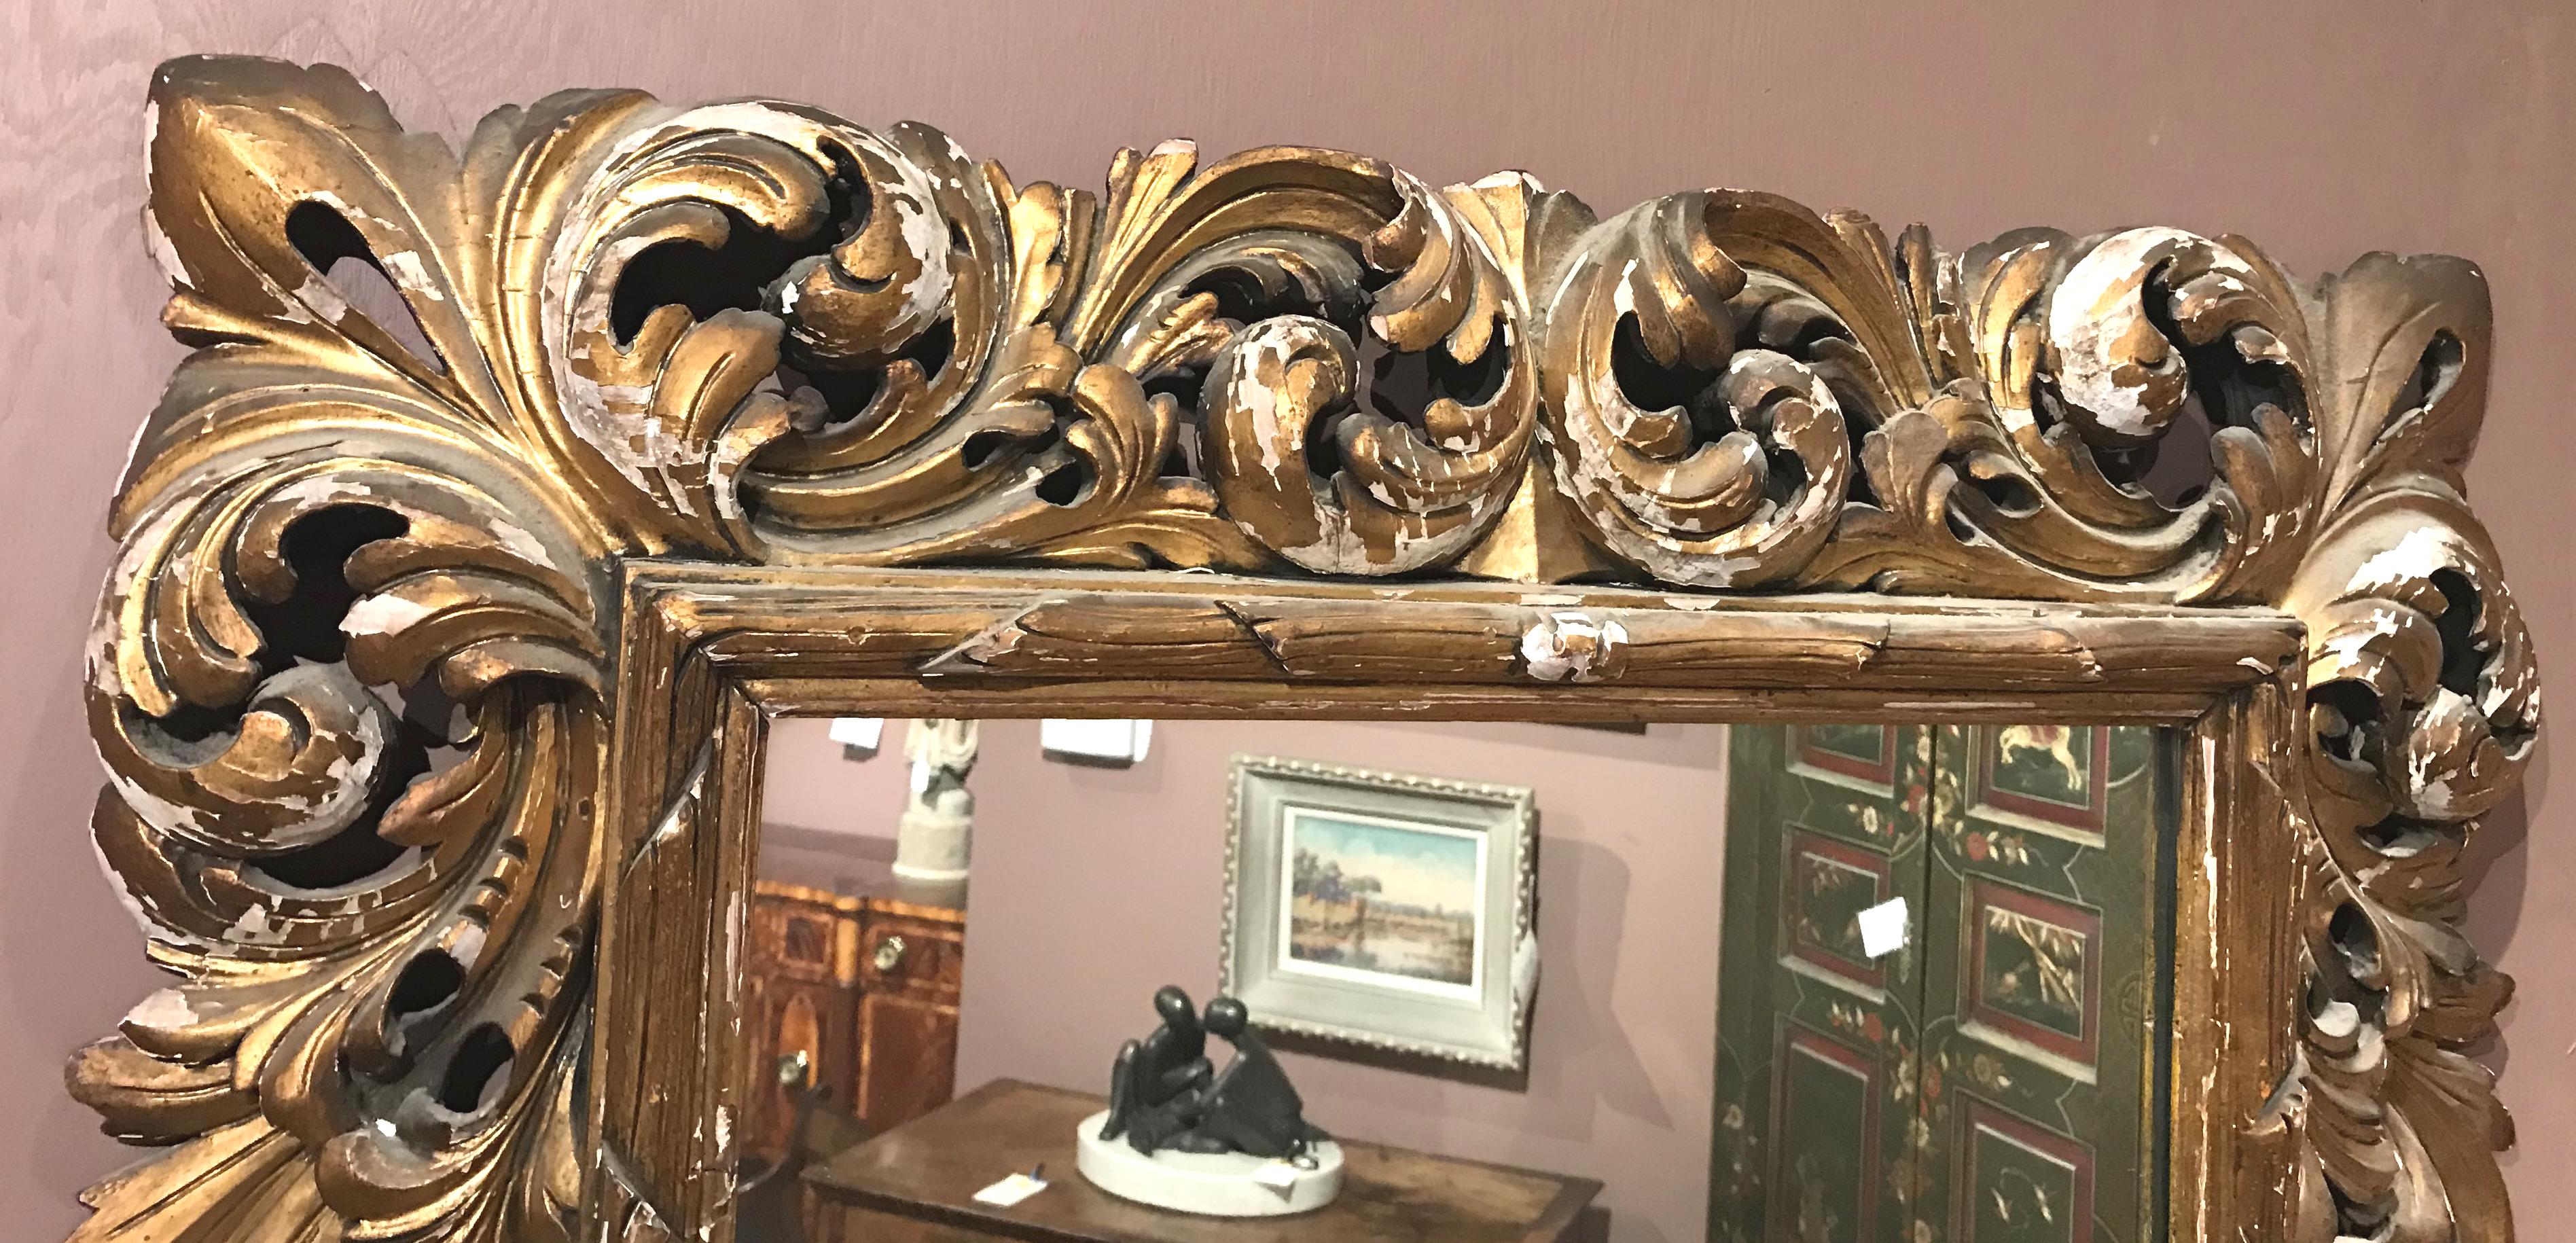 A fine example of an 18th-19th century Italian pierce carved giltwood framed mirror with scrolled foliate decoration, with some gilt losses overall and other imperfections and expected wear from age and use. The glass has been replaced at some time.